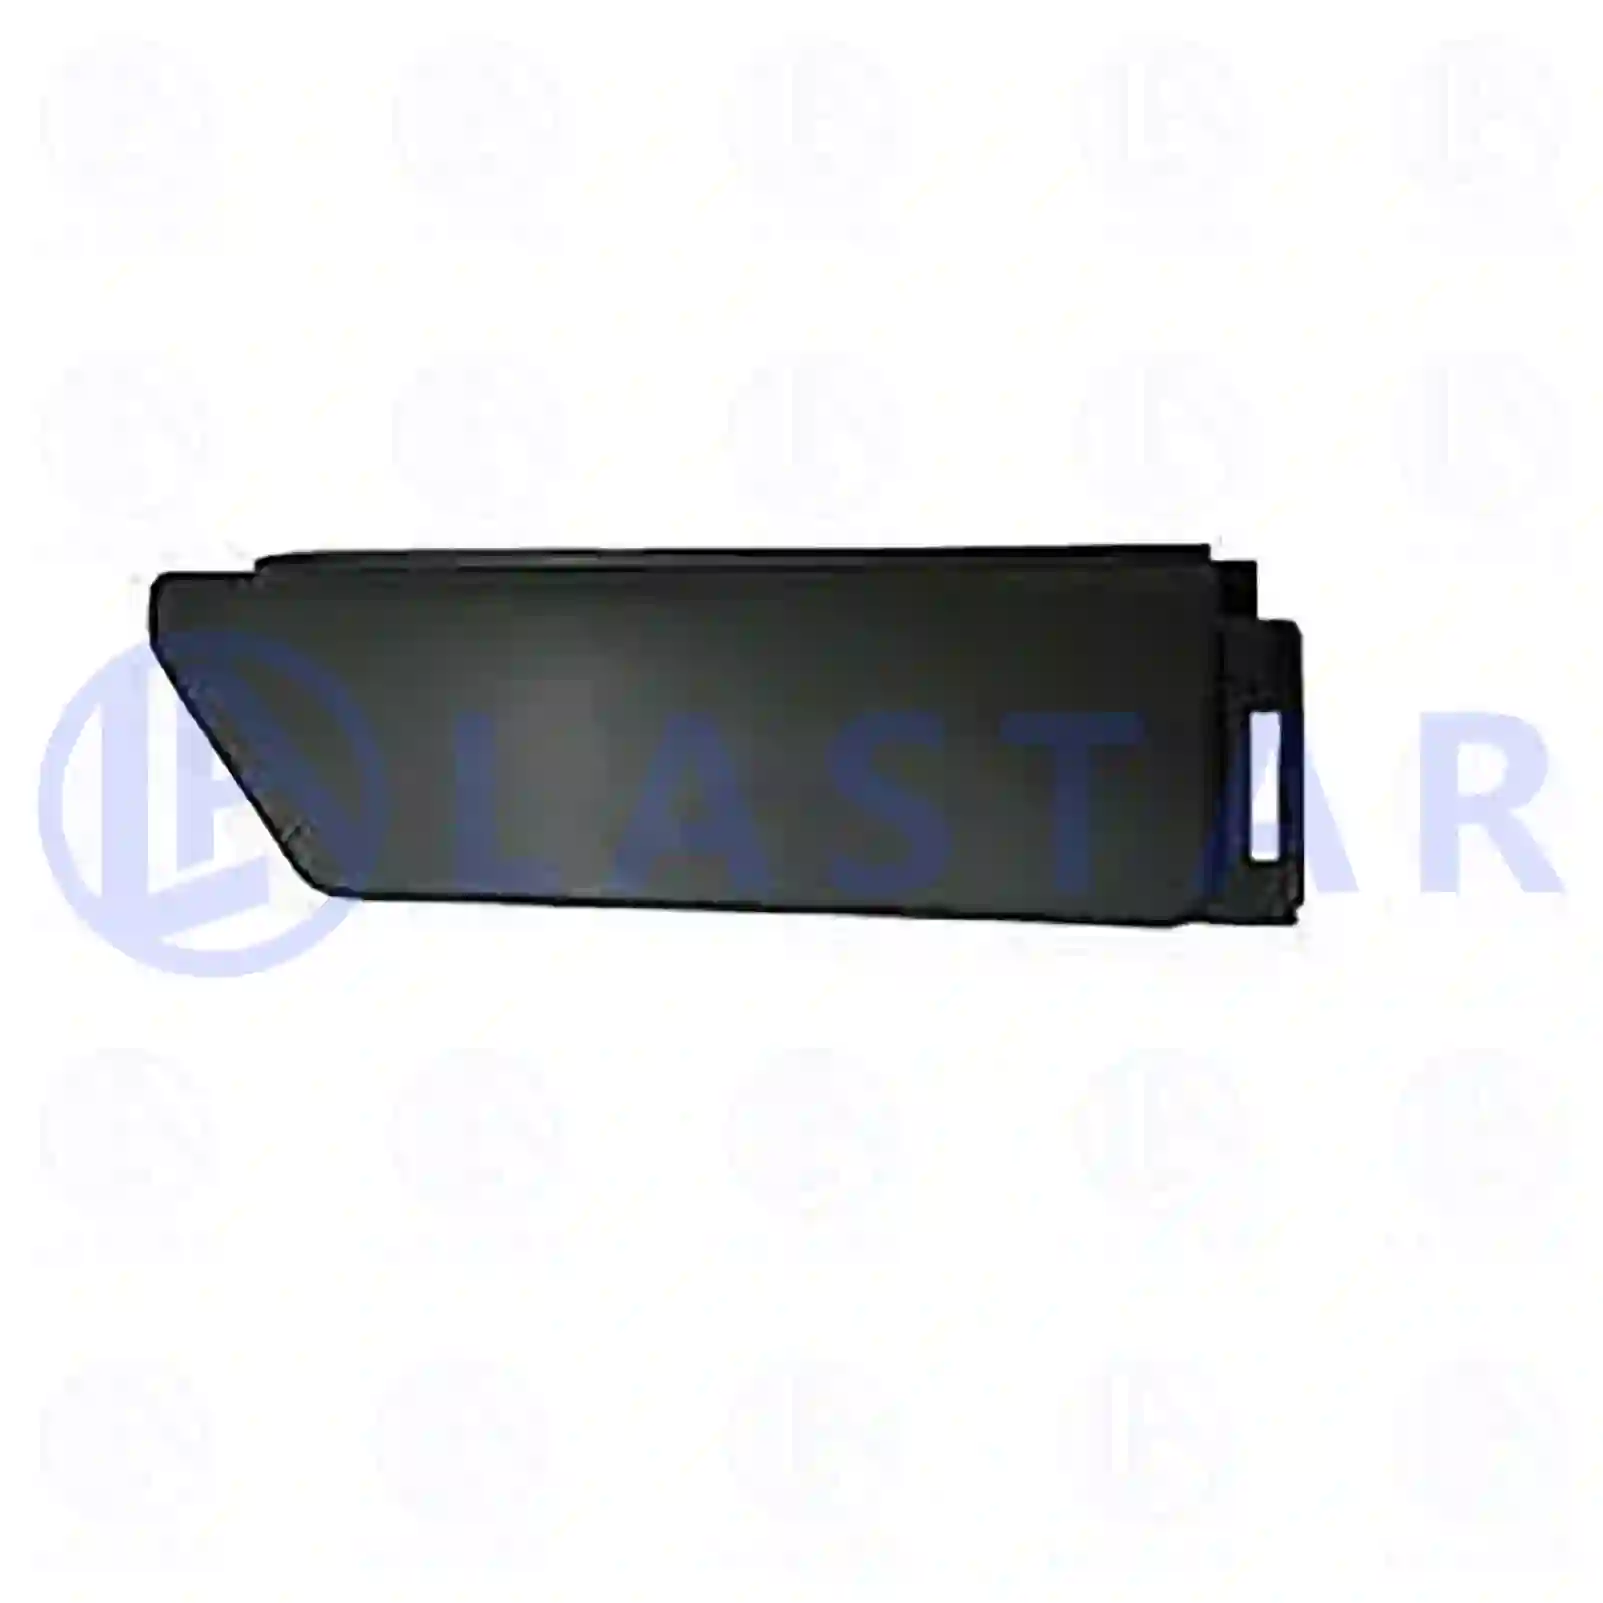 Cover, lateral, right, 77719463, 9438801436, 94388014367C72 ||  77719463 Lastar Spare Part | Truck Spare Parts, Auotomotive Spare Parts Cover, lateral, right, 77719463, 9438801436, 94388014367C72 ||  77719463 Lastar Spare Part | Truck Spare Parts, Auotomotive Spare Parts